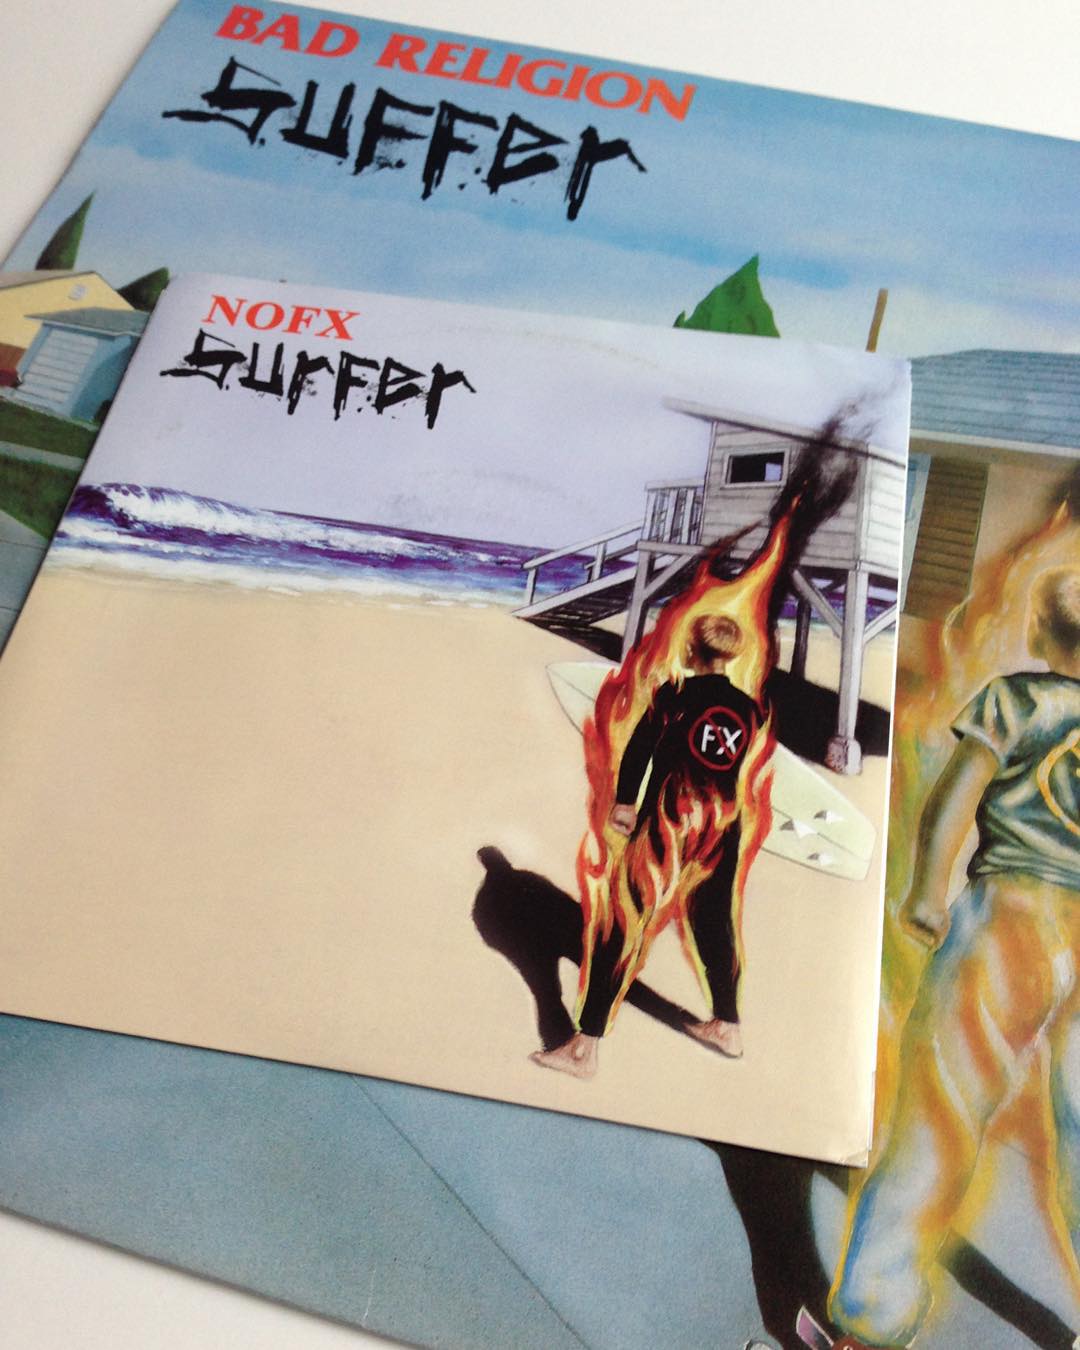 DAY 3 - record with a rip off sleeve

NOFX - Surfer

Being a fan of both, Bad Re...